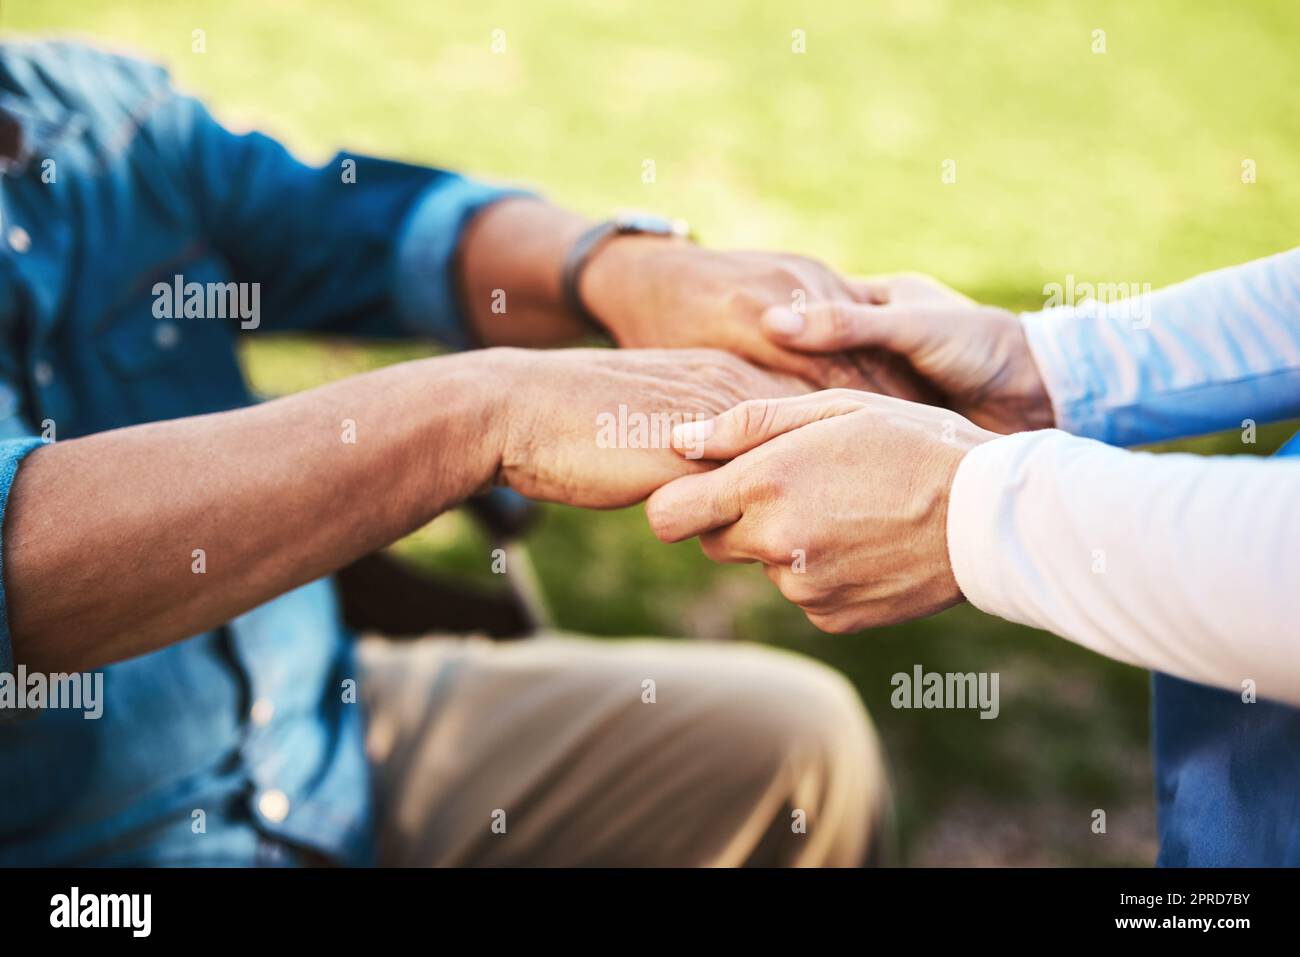 Im here to bring happiness. an unrecognizable woman holding a senior mans hands. Stock Photo